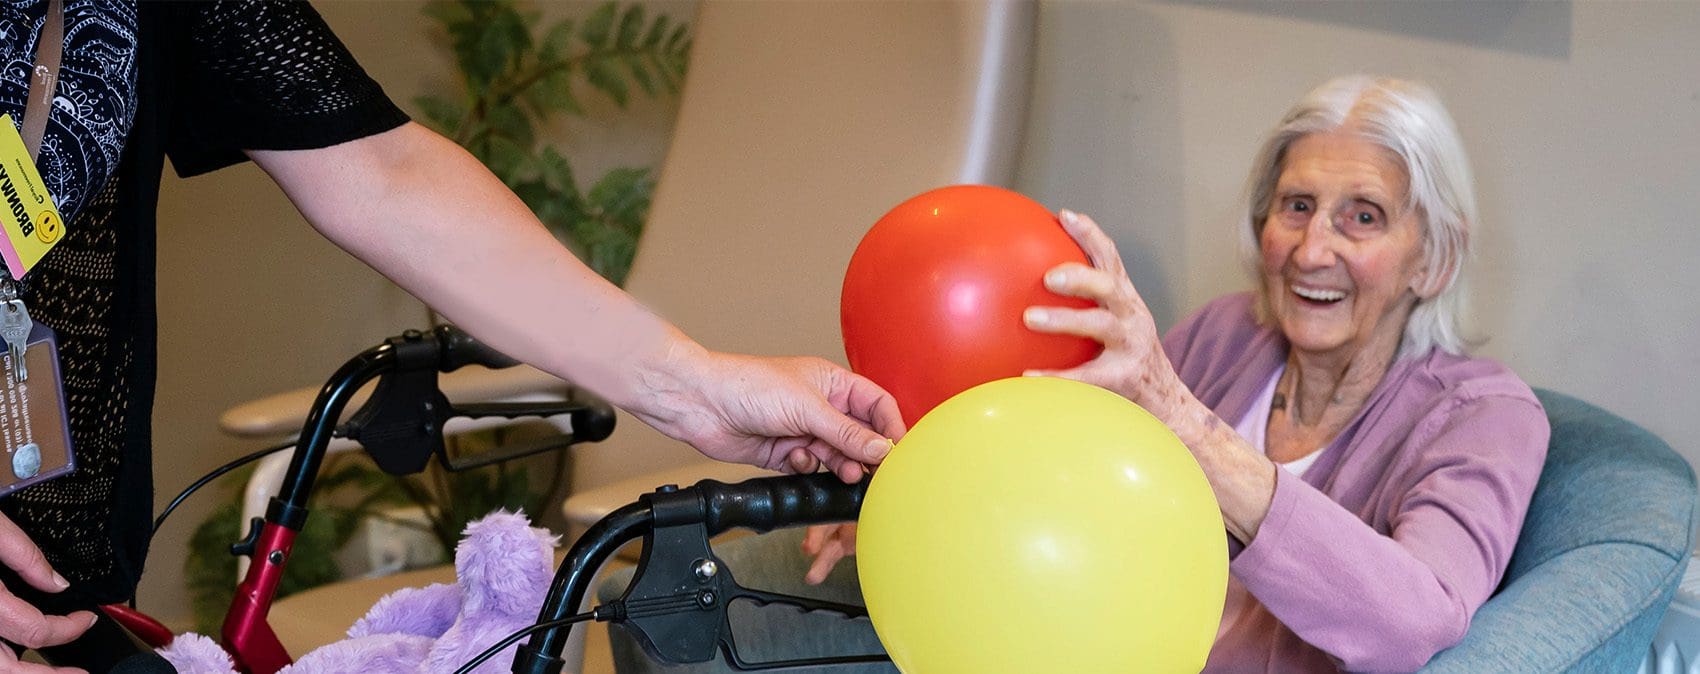 A woman in a wheelchair with balloons in her hands at a retirement home.